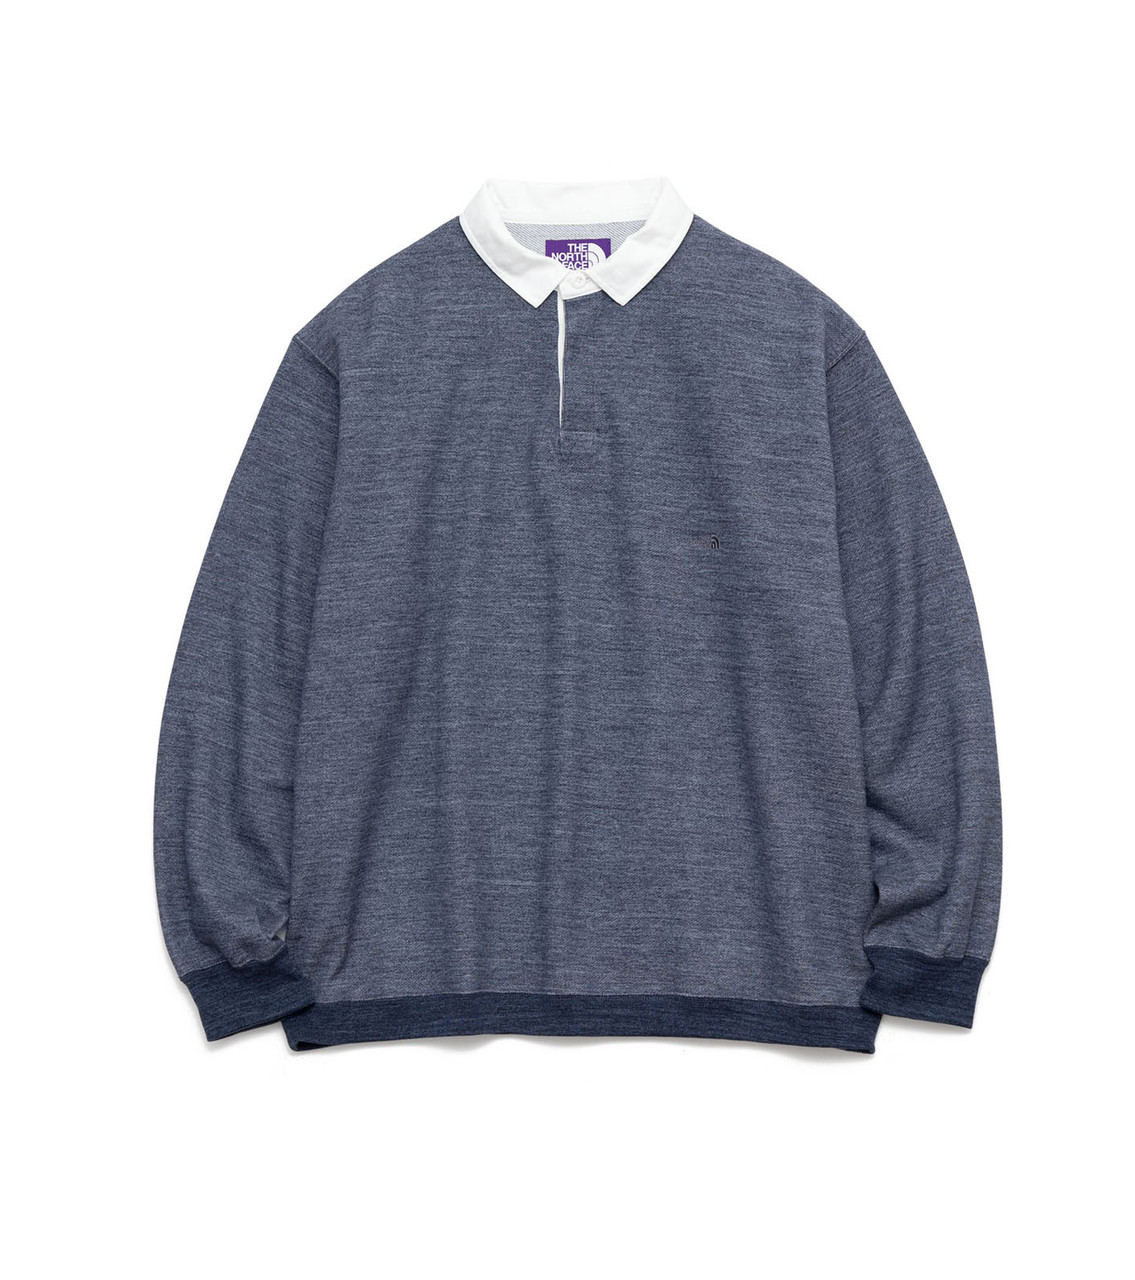 THE NORTH FACE PURPLE LABEL Rugby Sweat shirt NT6308N 6649